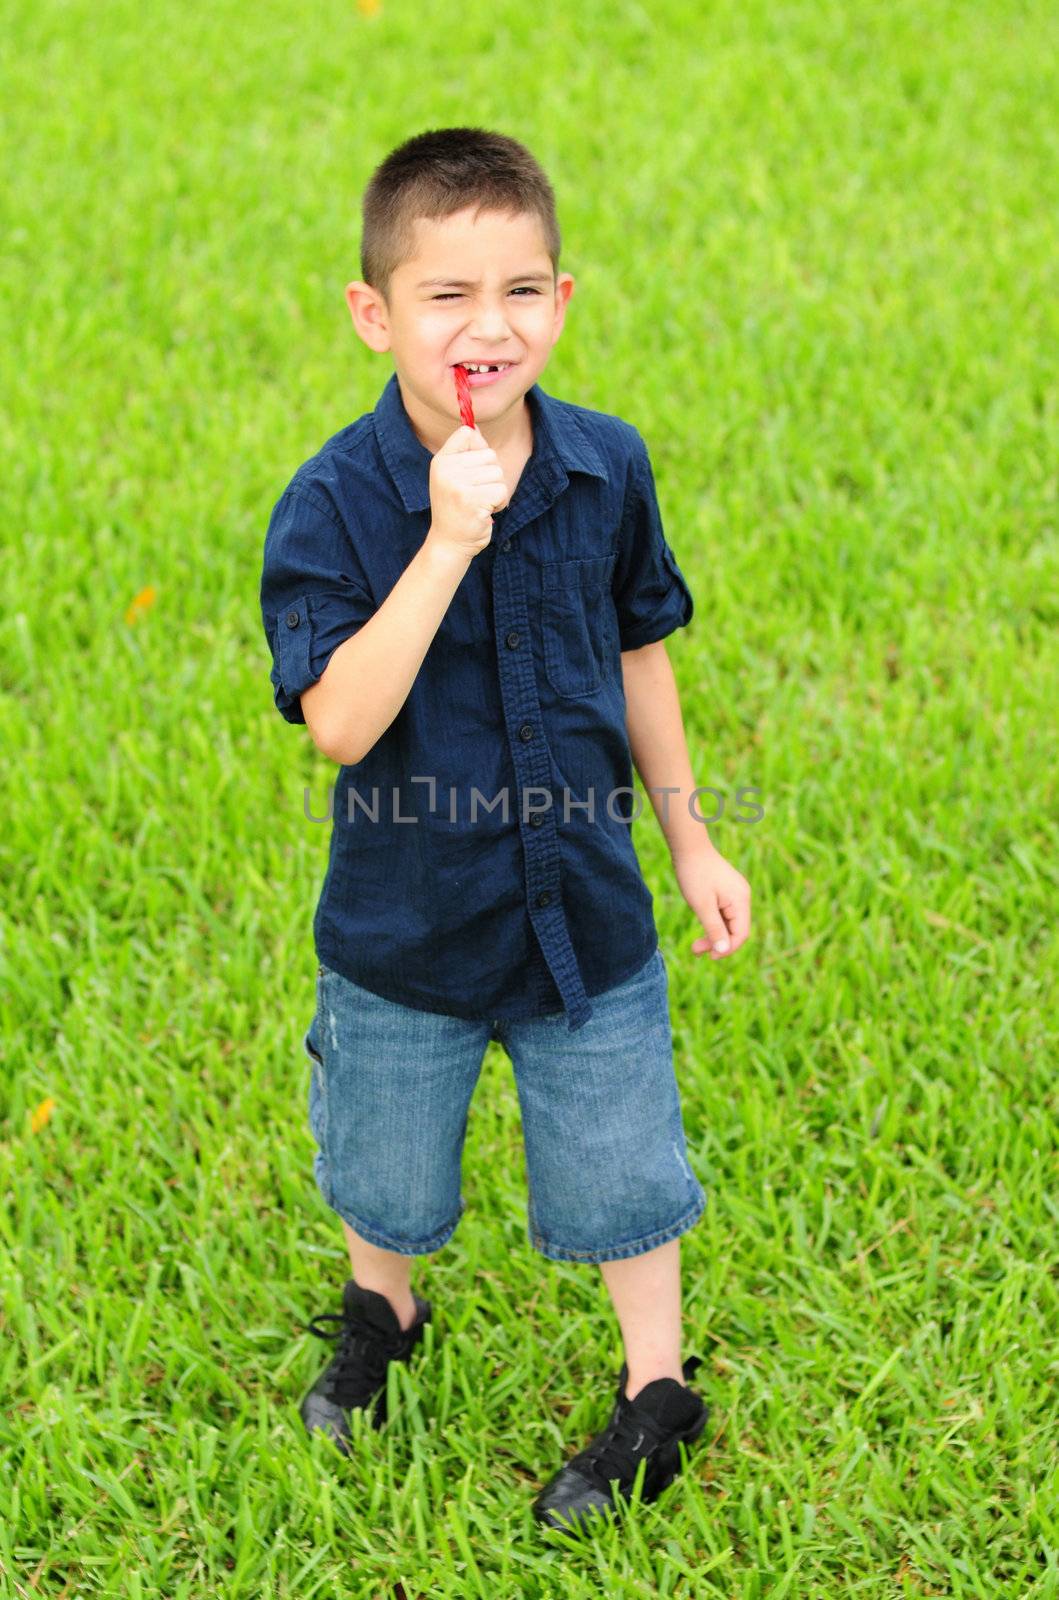 Young boy eating red licorice junk food